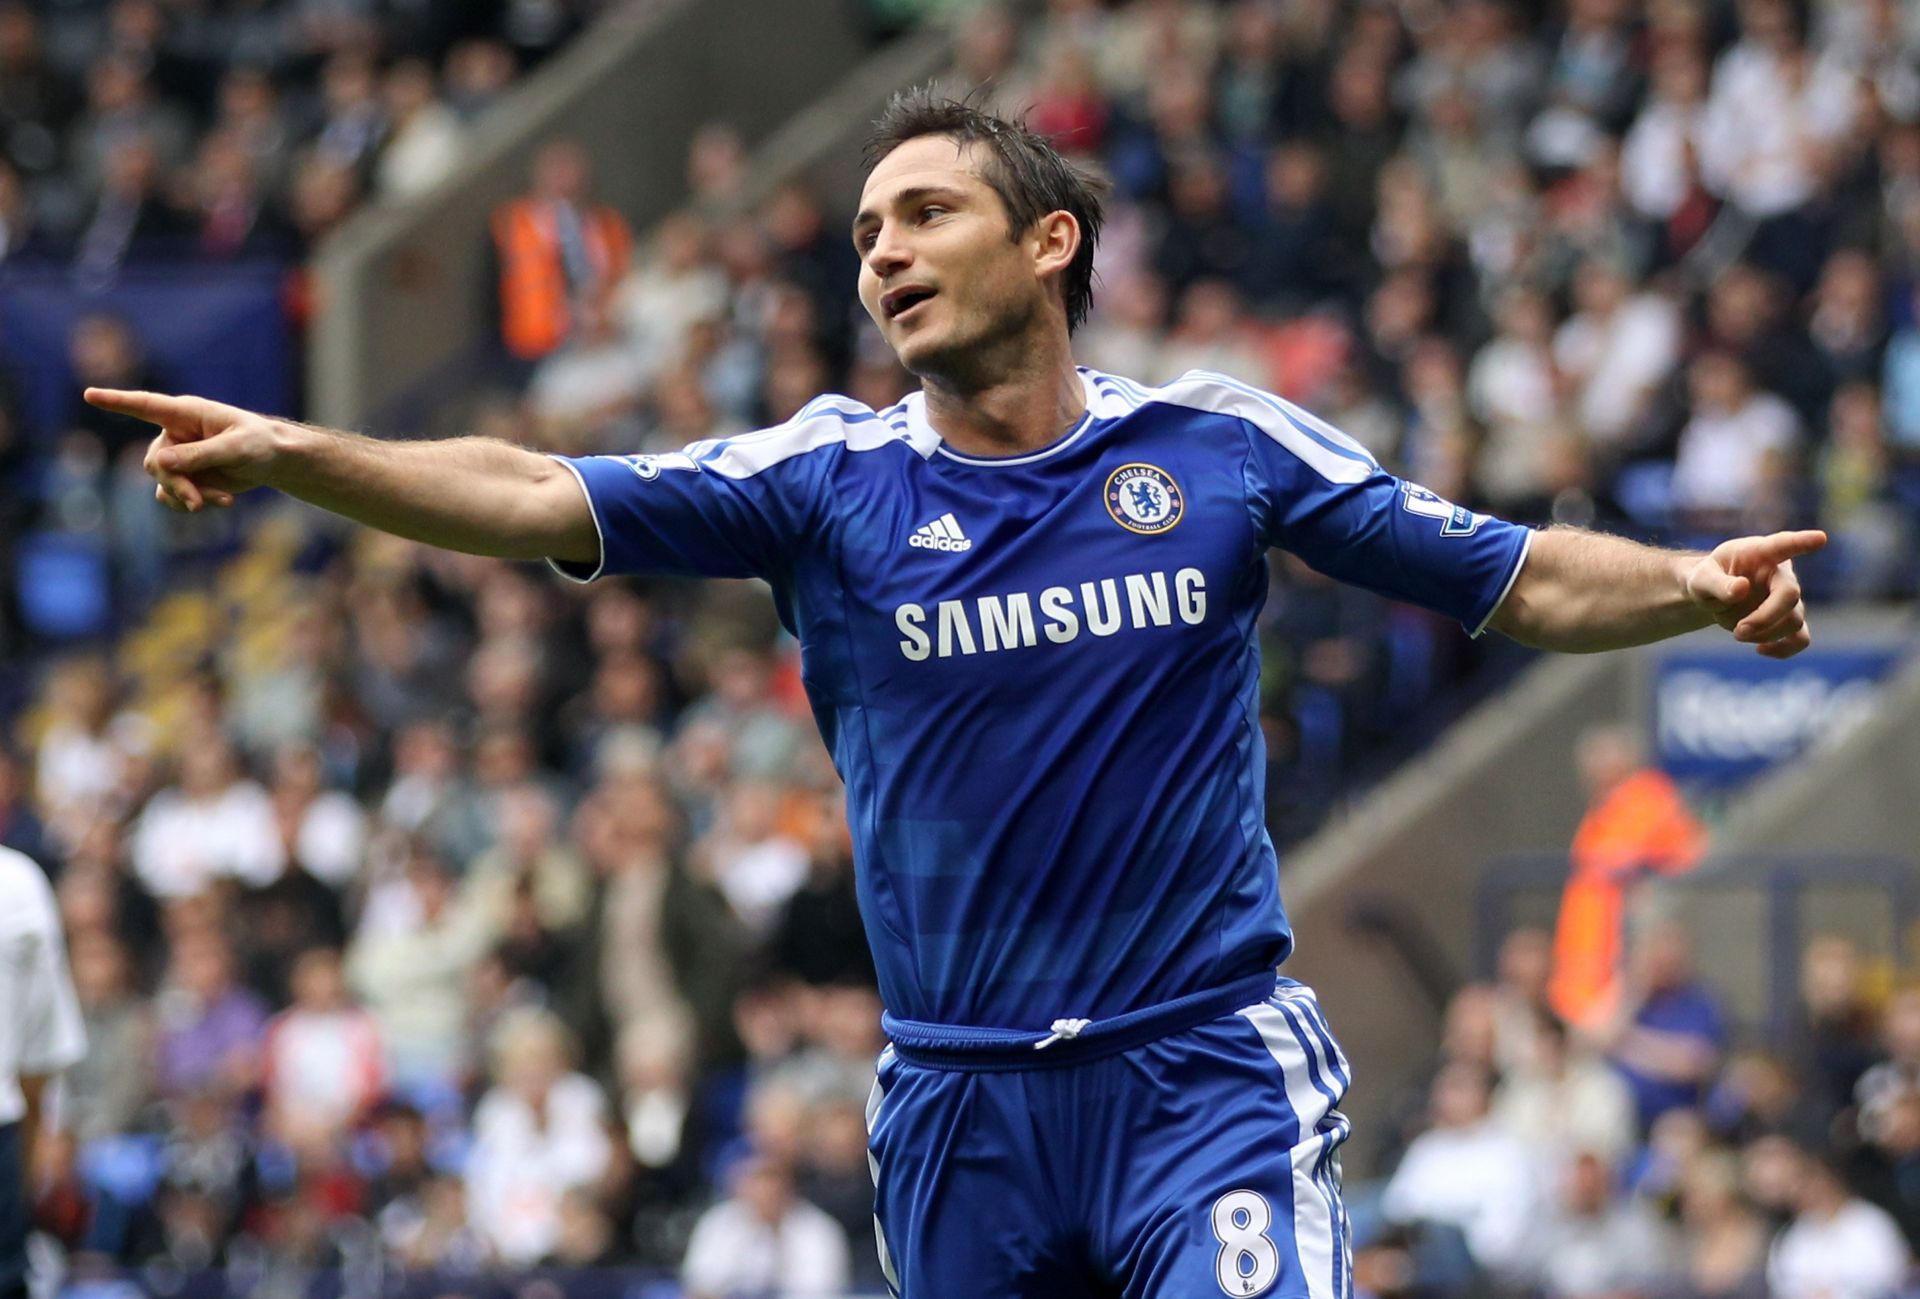 Frank Lampard is the only midfielder on this list